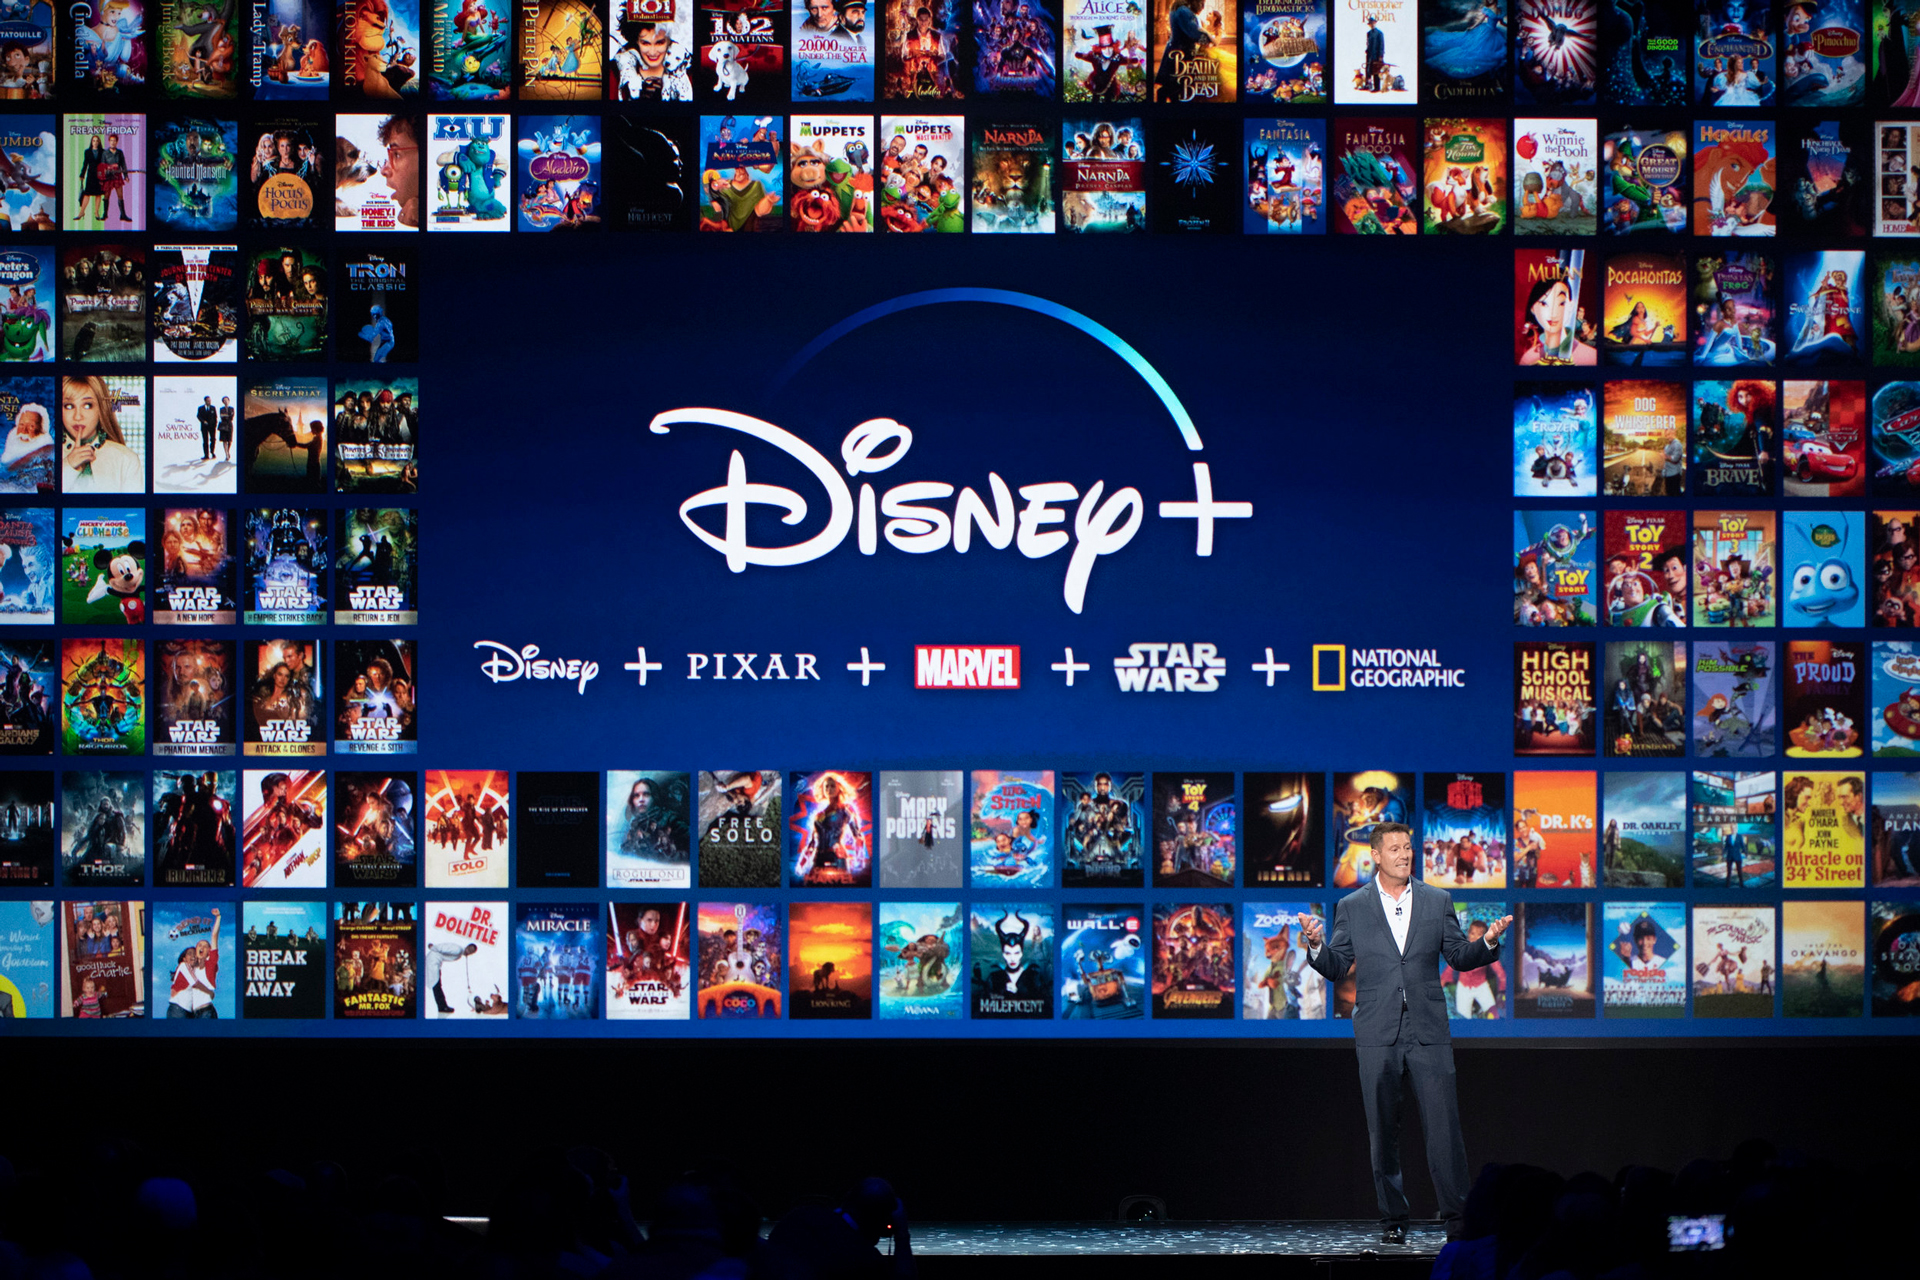 Disney Announces Six New Titles Showcases Upcoming Slate Of Original Series And Films At D23 Expo 19 The Walt Disney Company